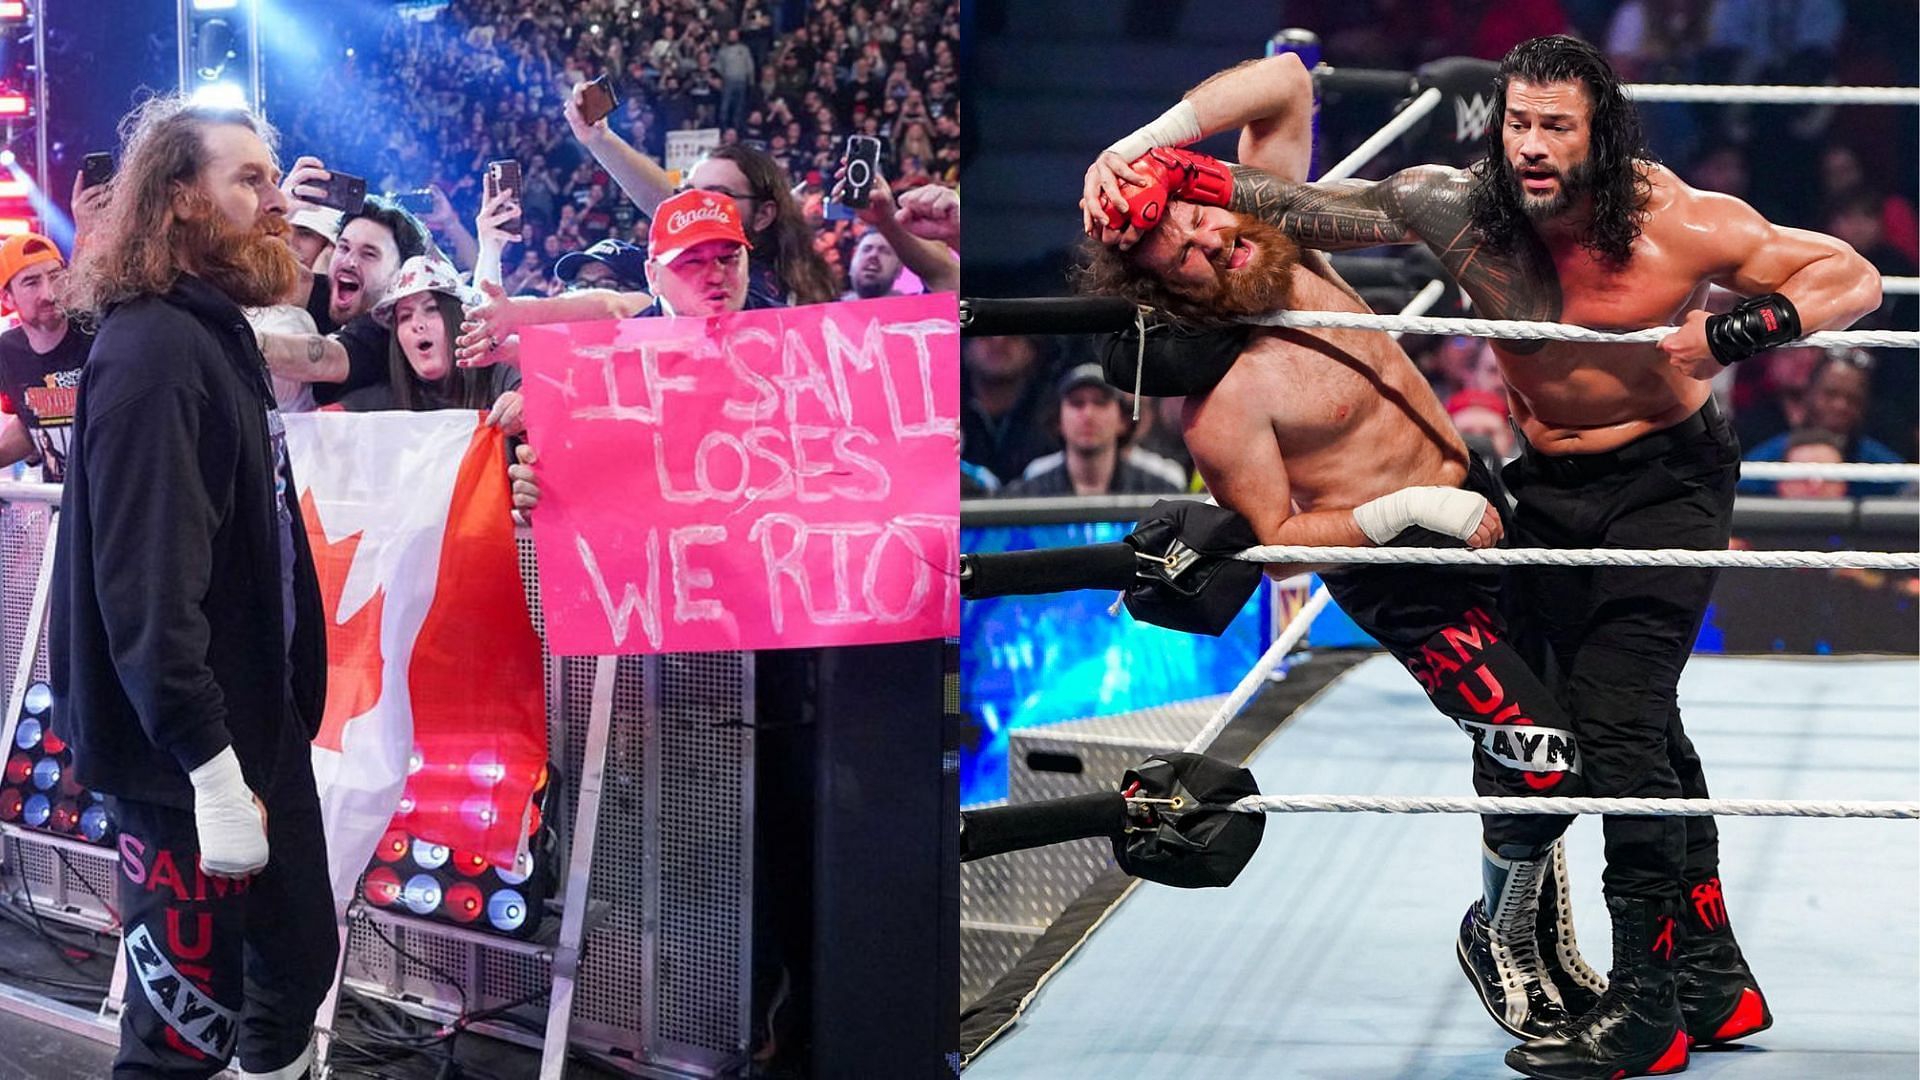 Sami Zayn was unable to defeat Roman Reigns at Elimination Chamber